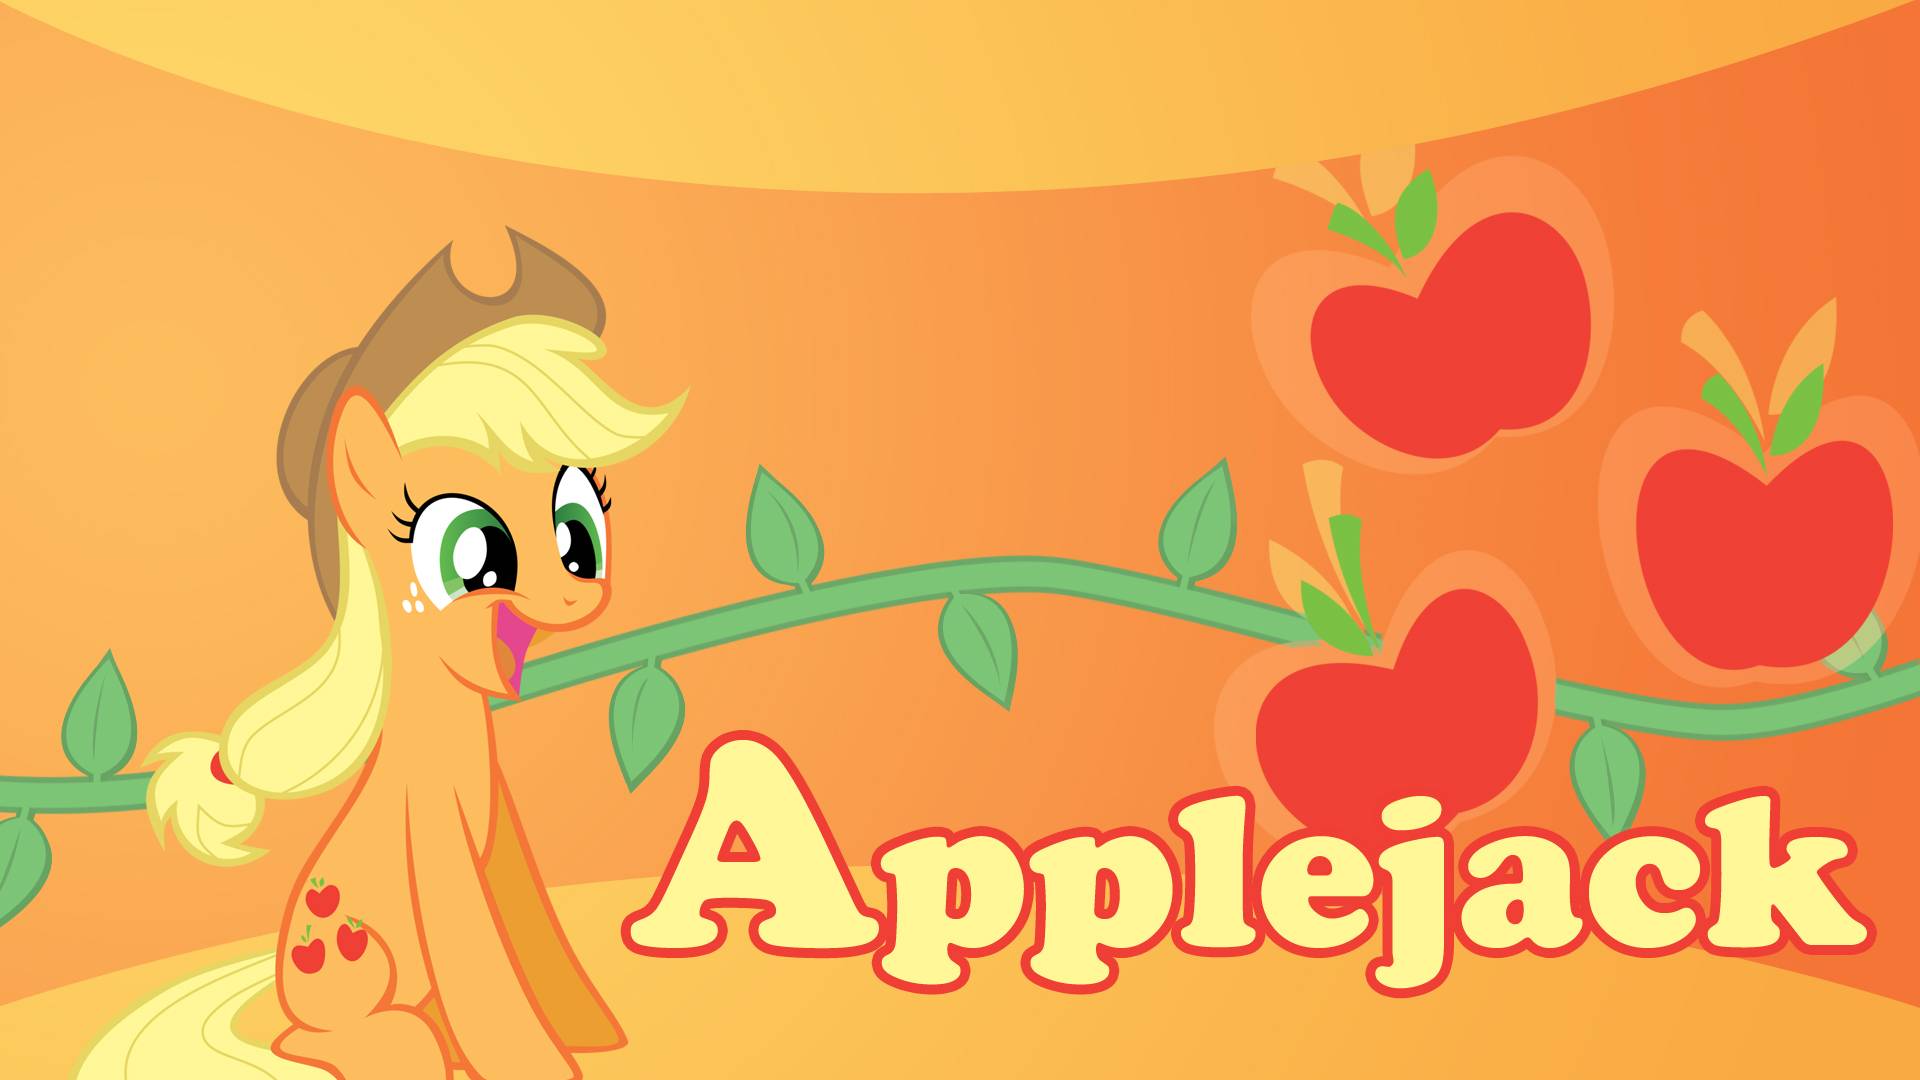 Applejack Wallpaper Is Awesome And This An